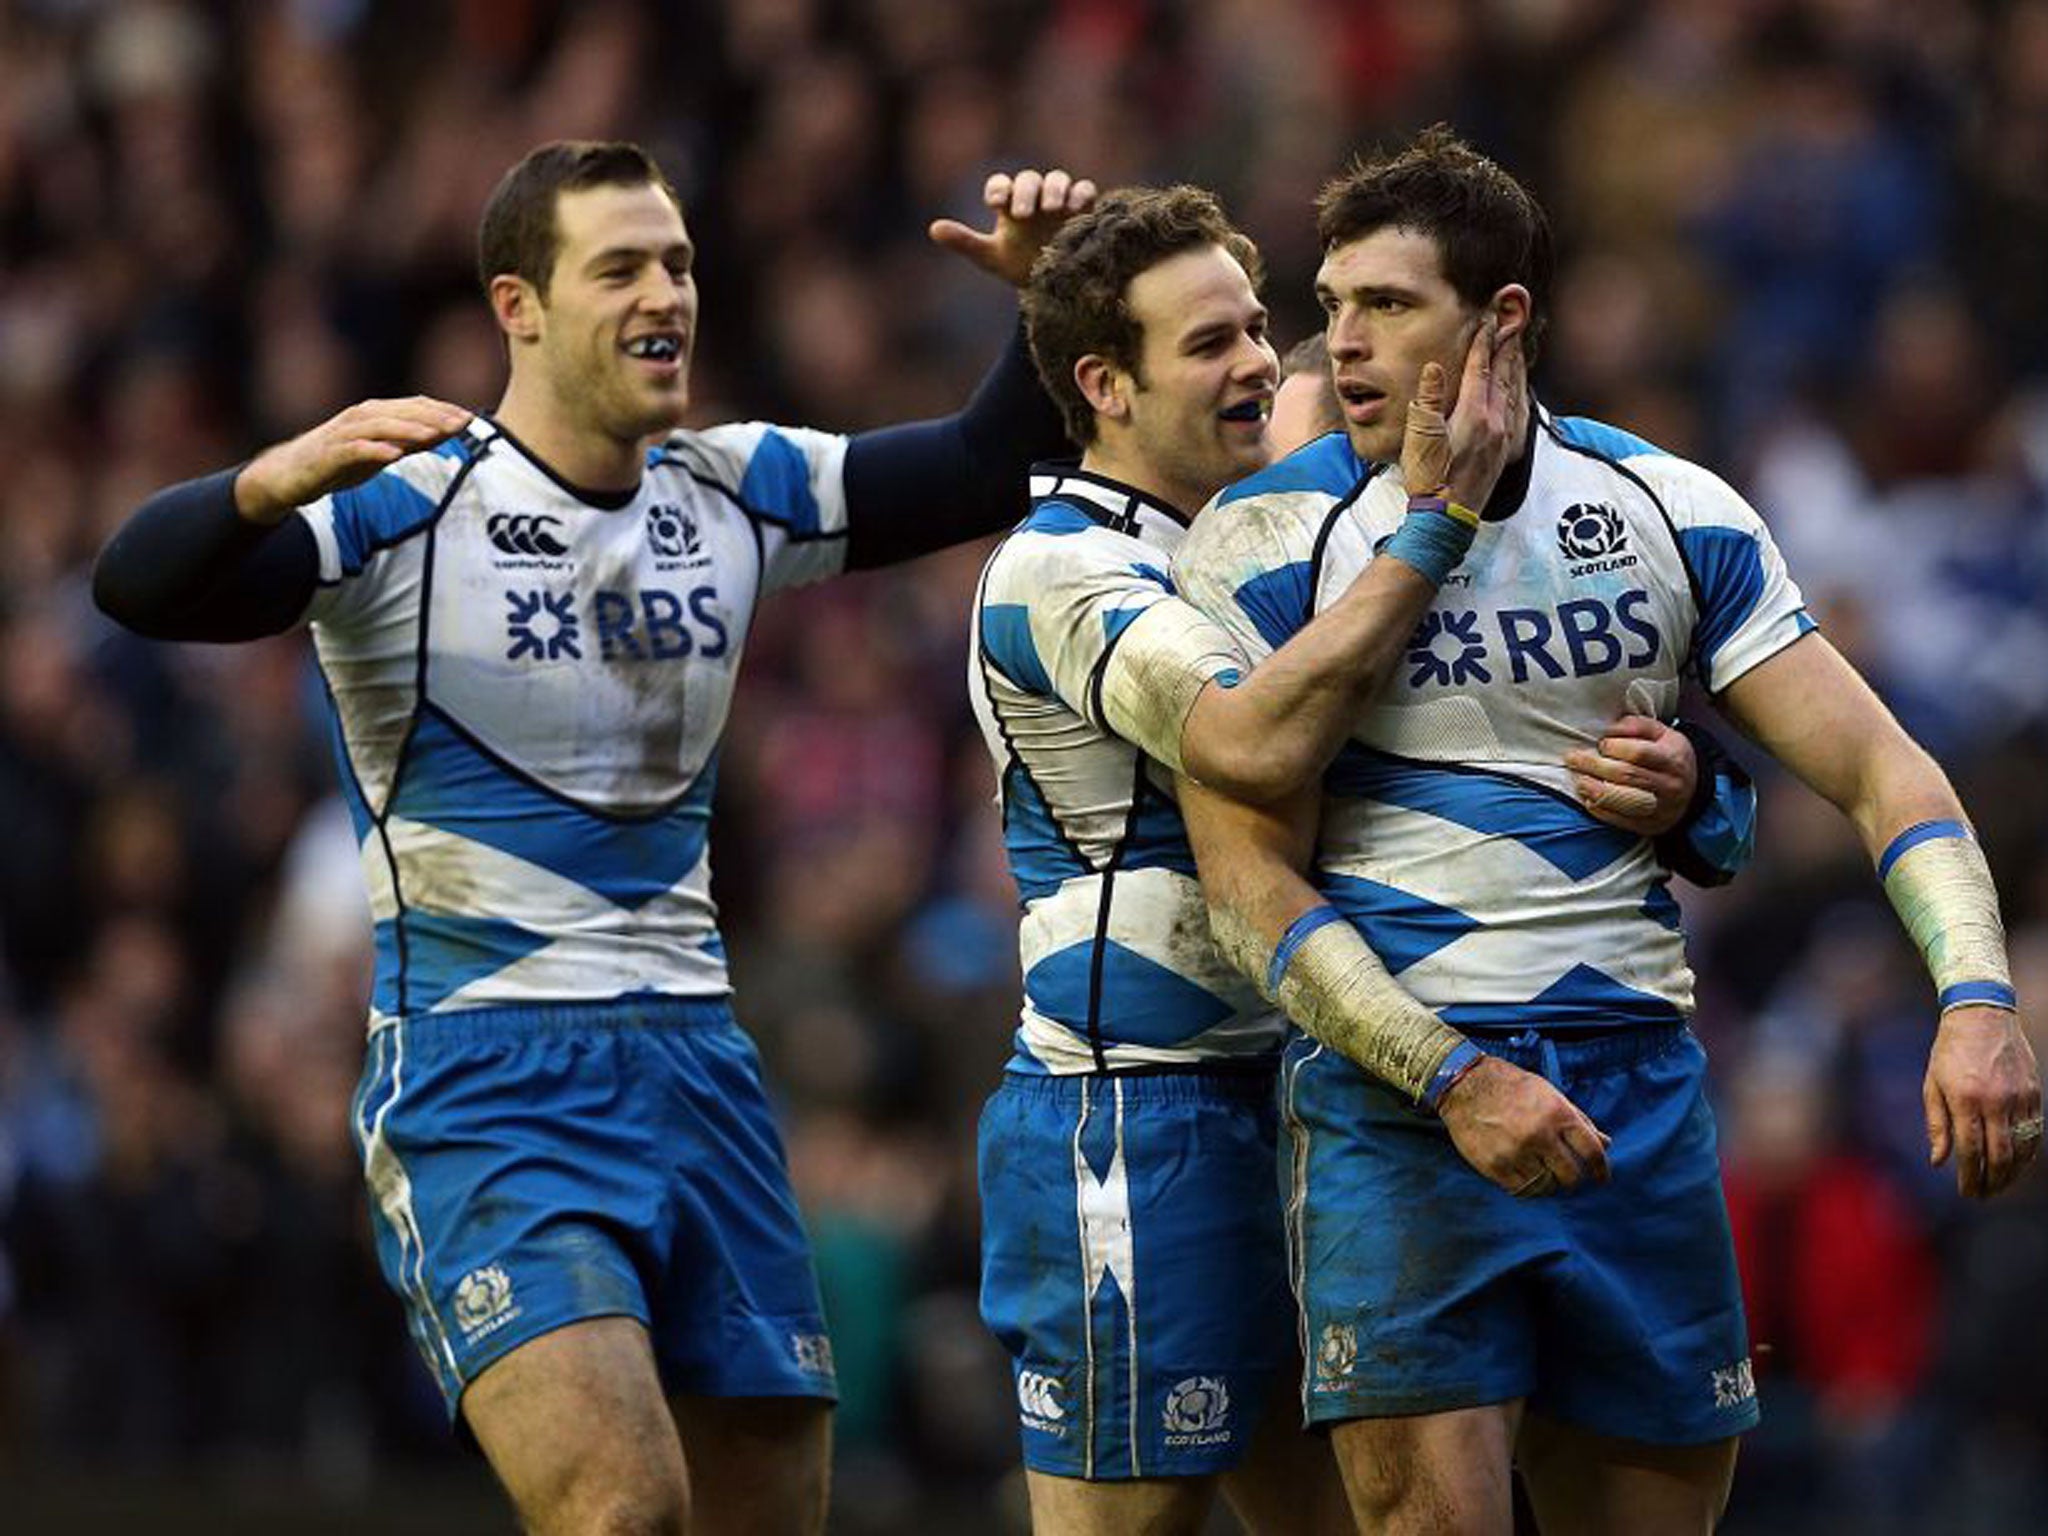 Sean Lamont (right) celebrates with Tim Visser (left) and Ruaridh Jackson during Scotland’s victory over Italy last weekend